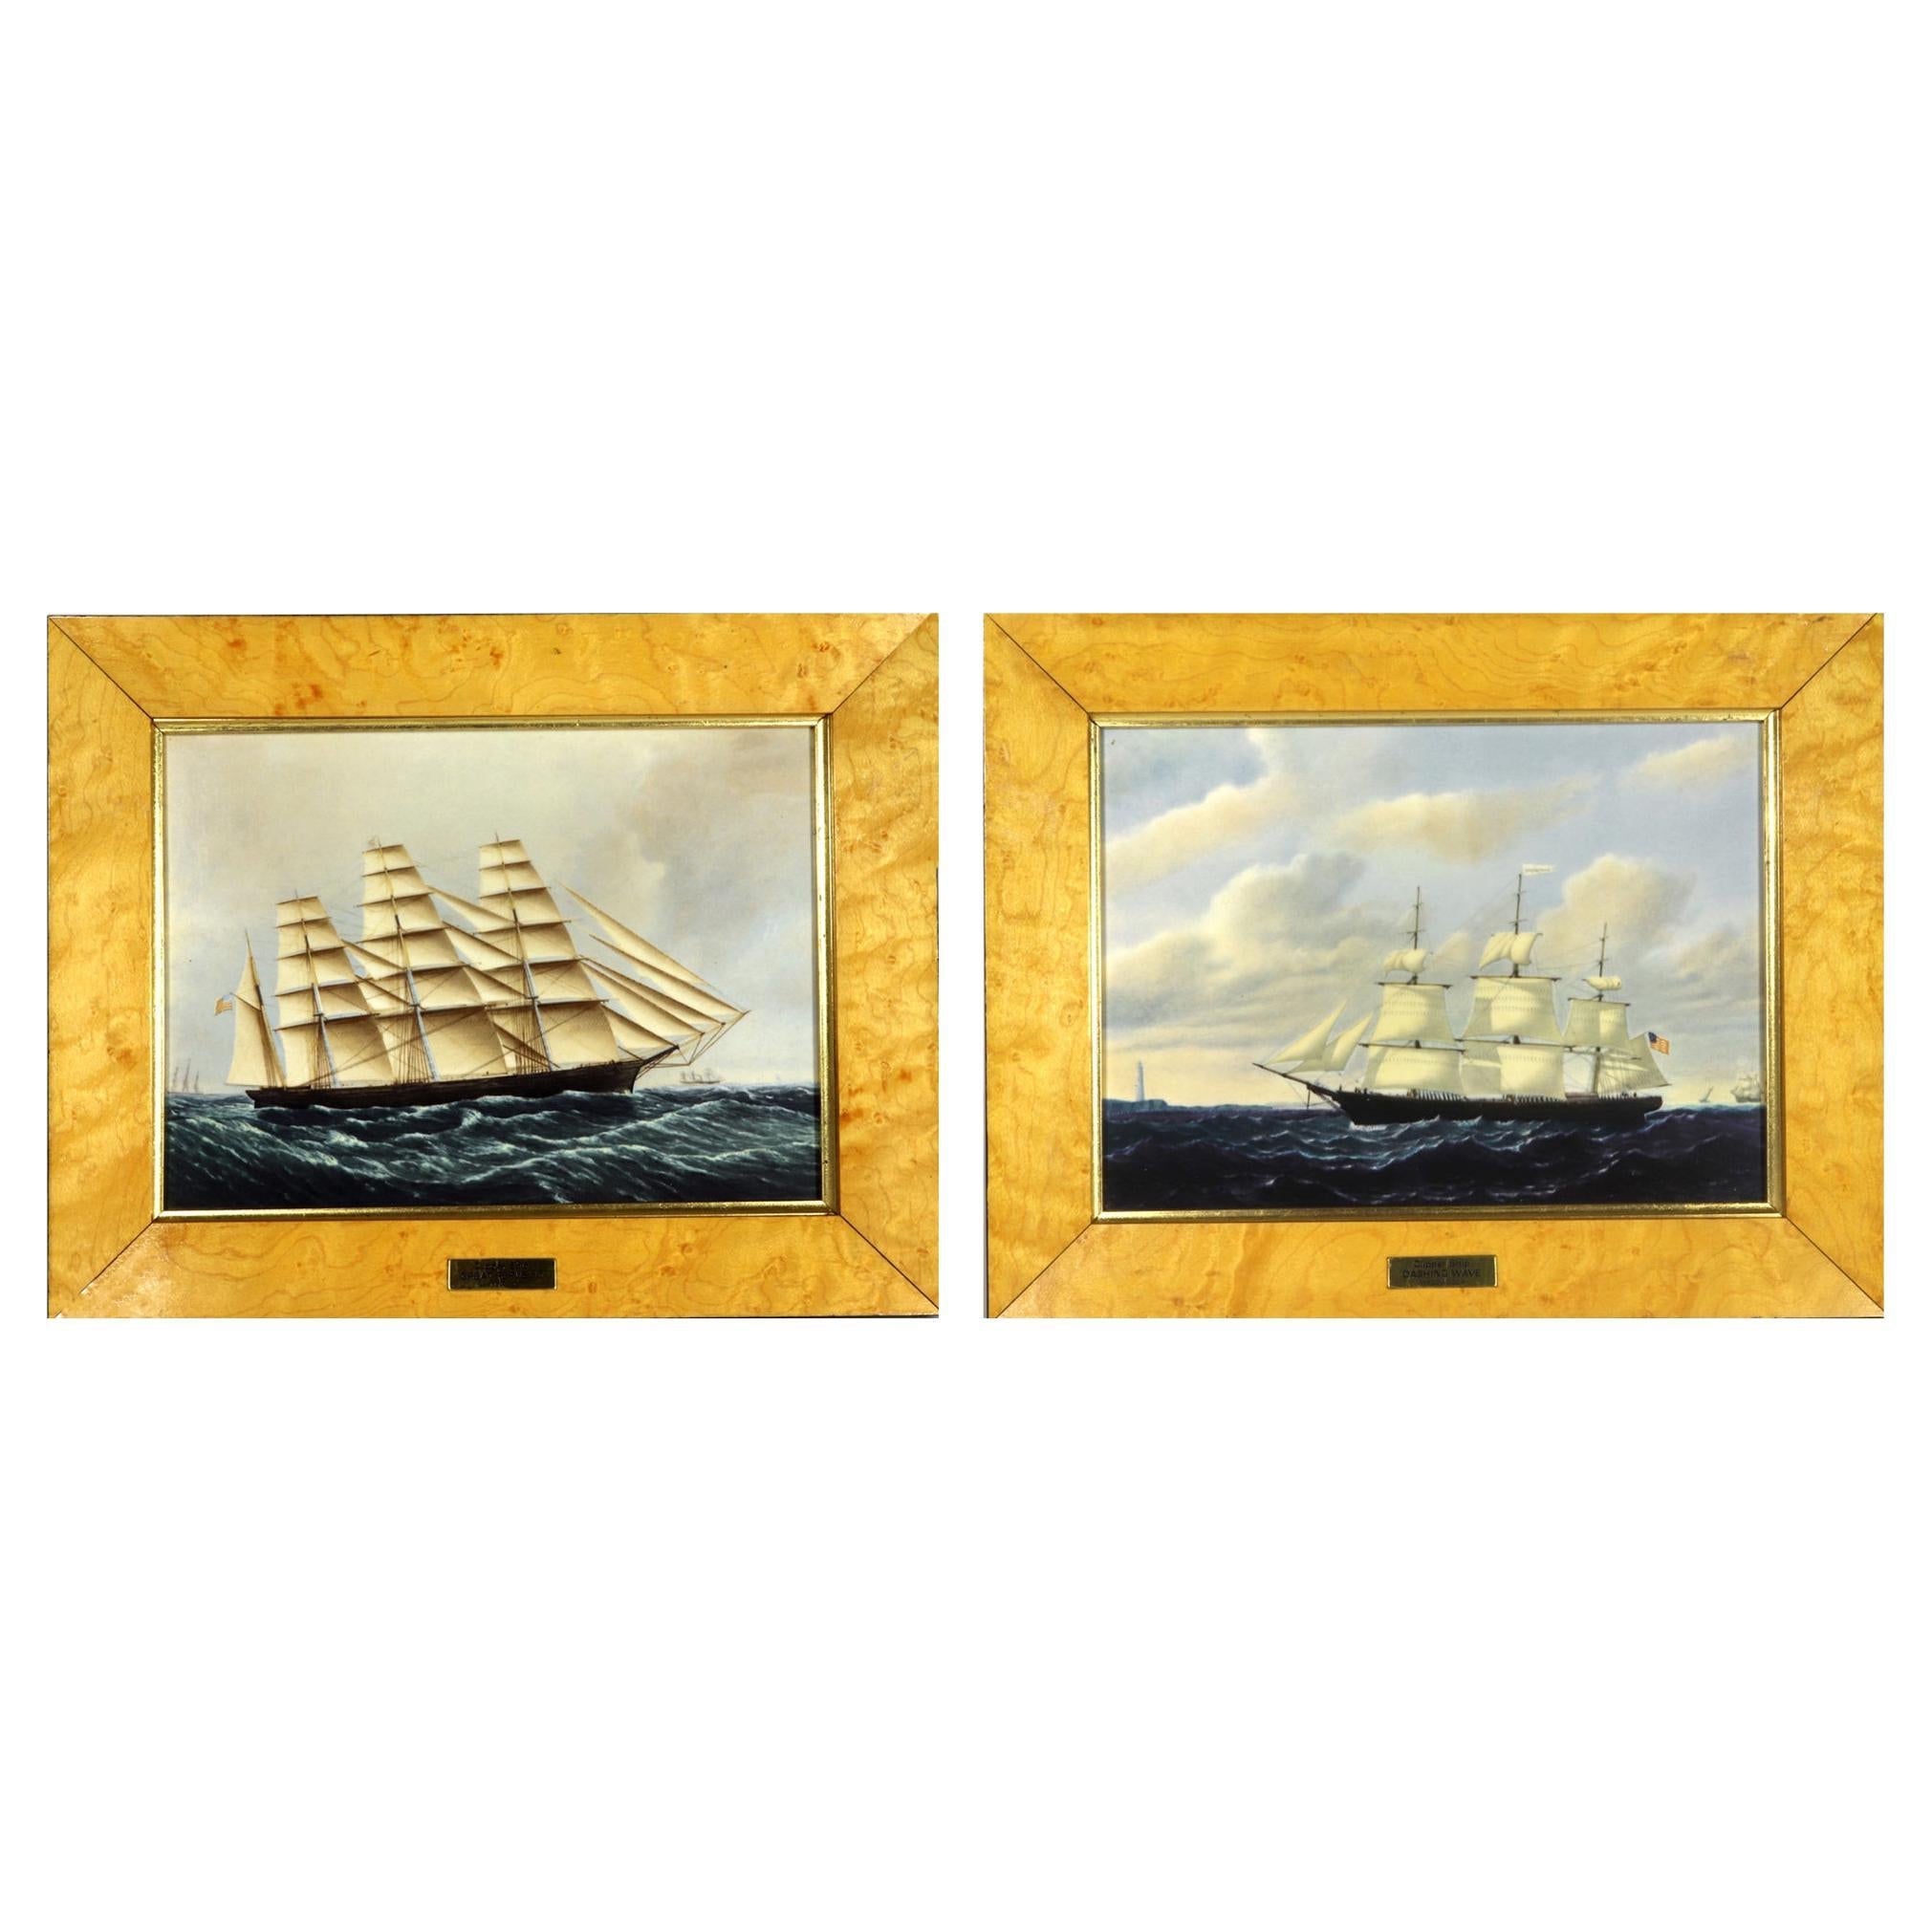 Wedgwood Porcelain Plaques of the Ships the Great Republic and the Dashing Wave